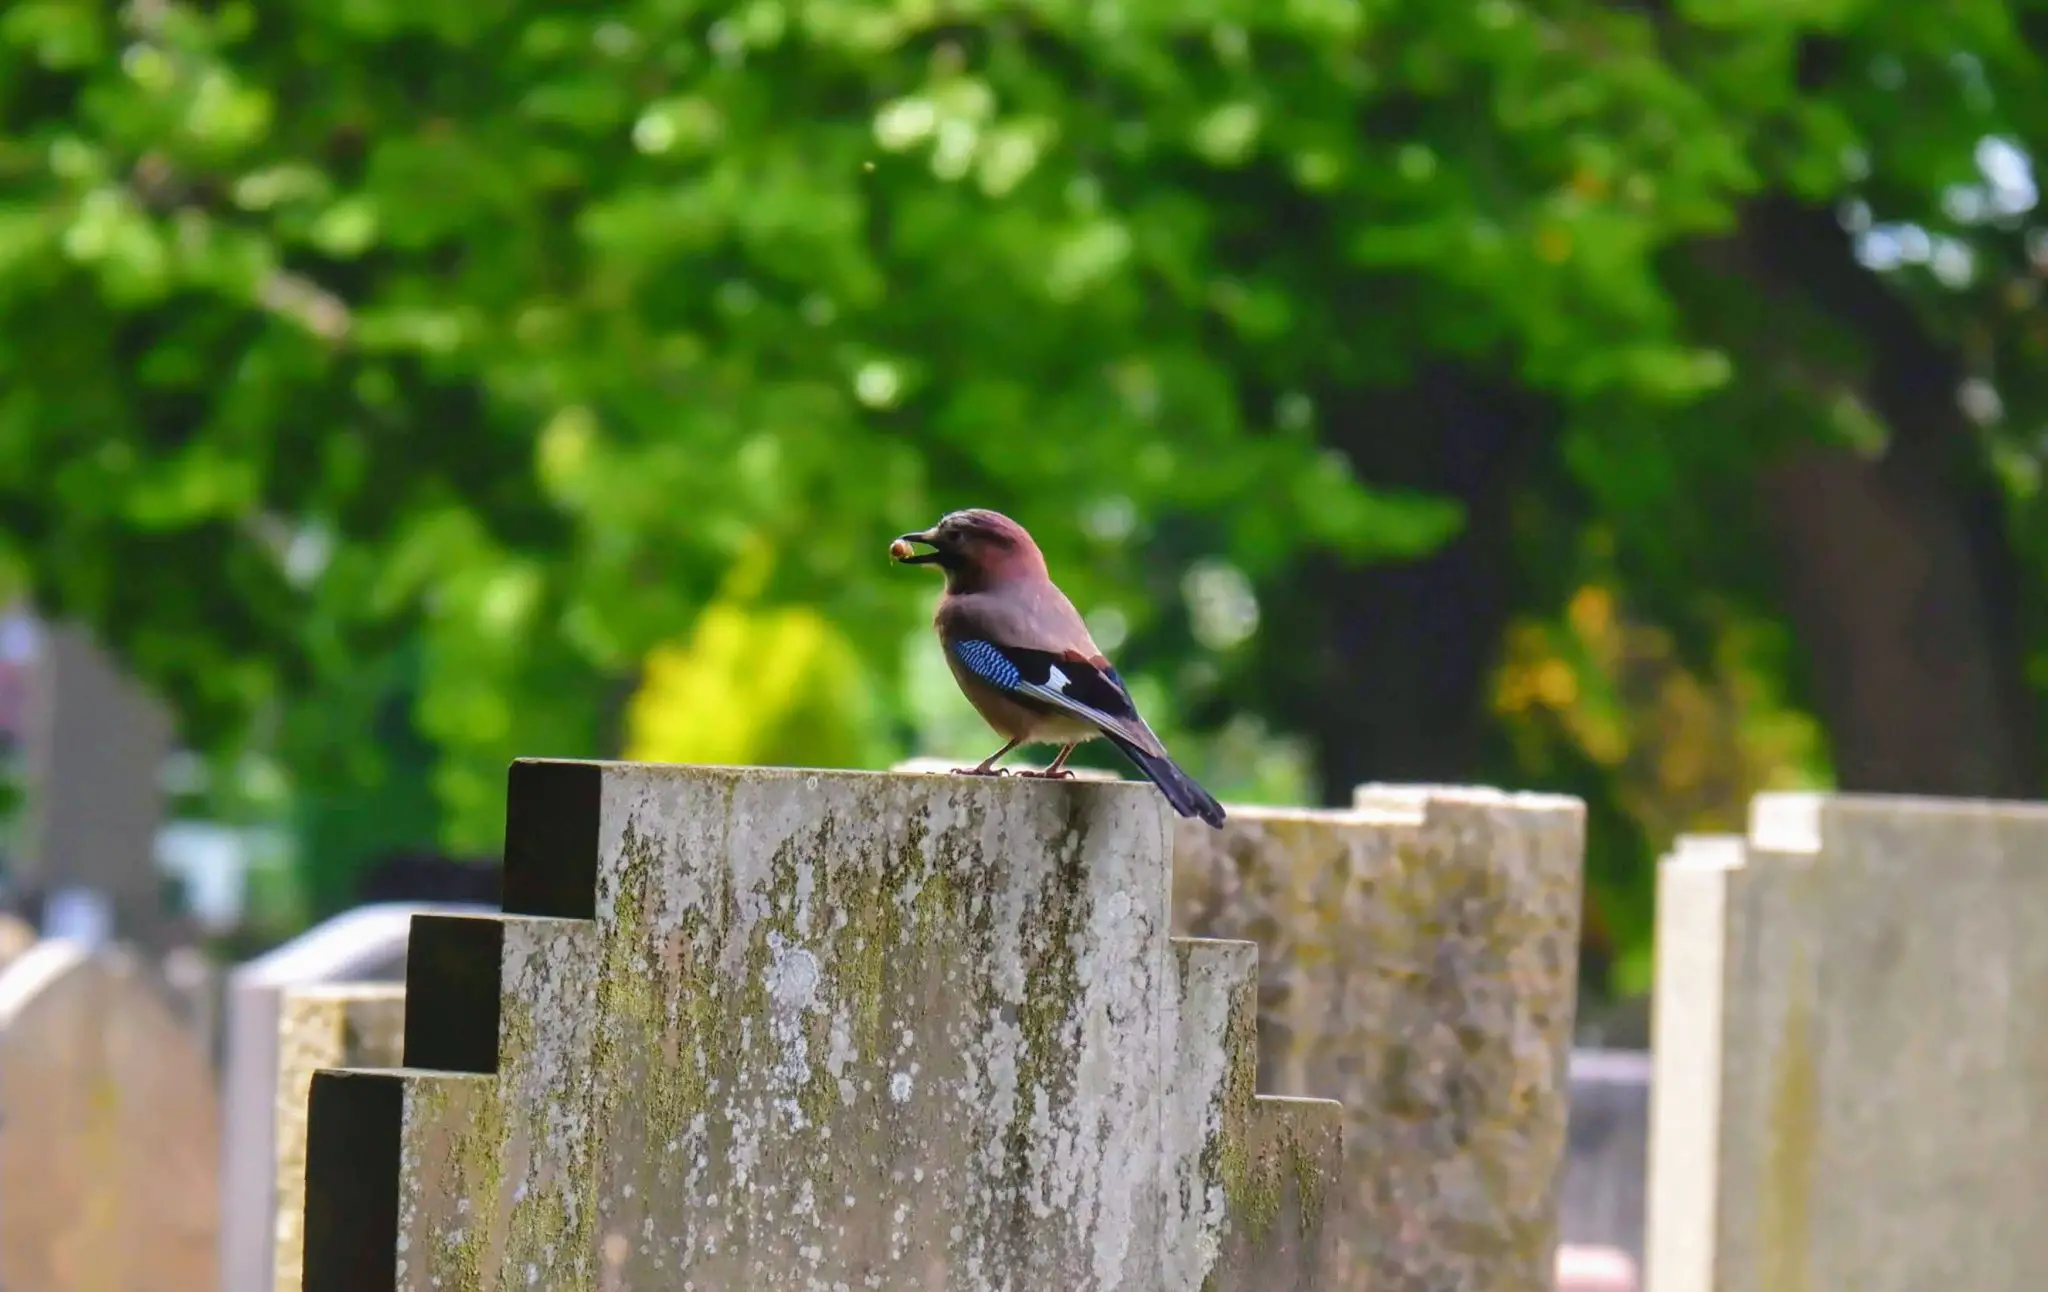 Jay in Southern Cemetery in Manchester